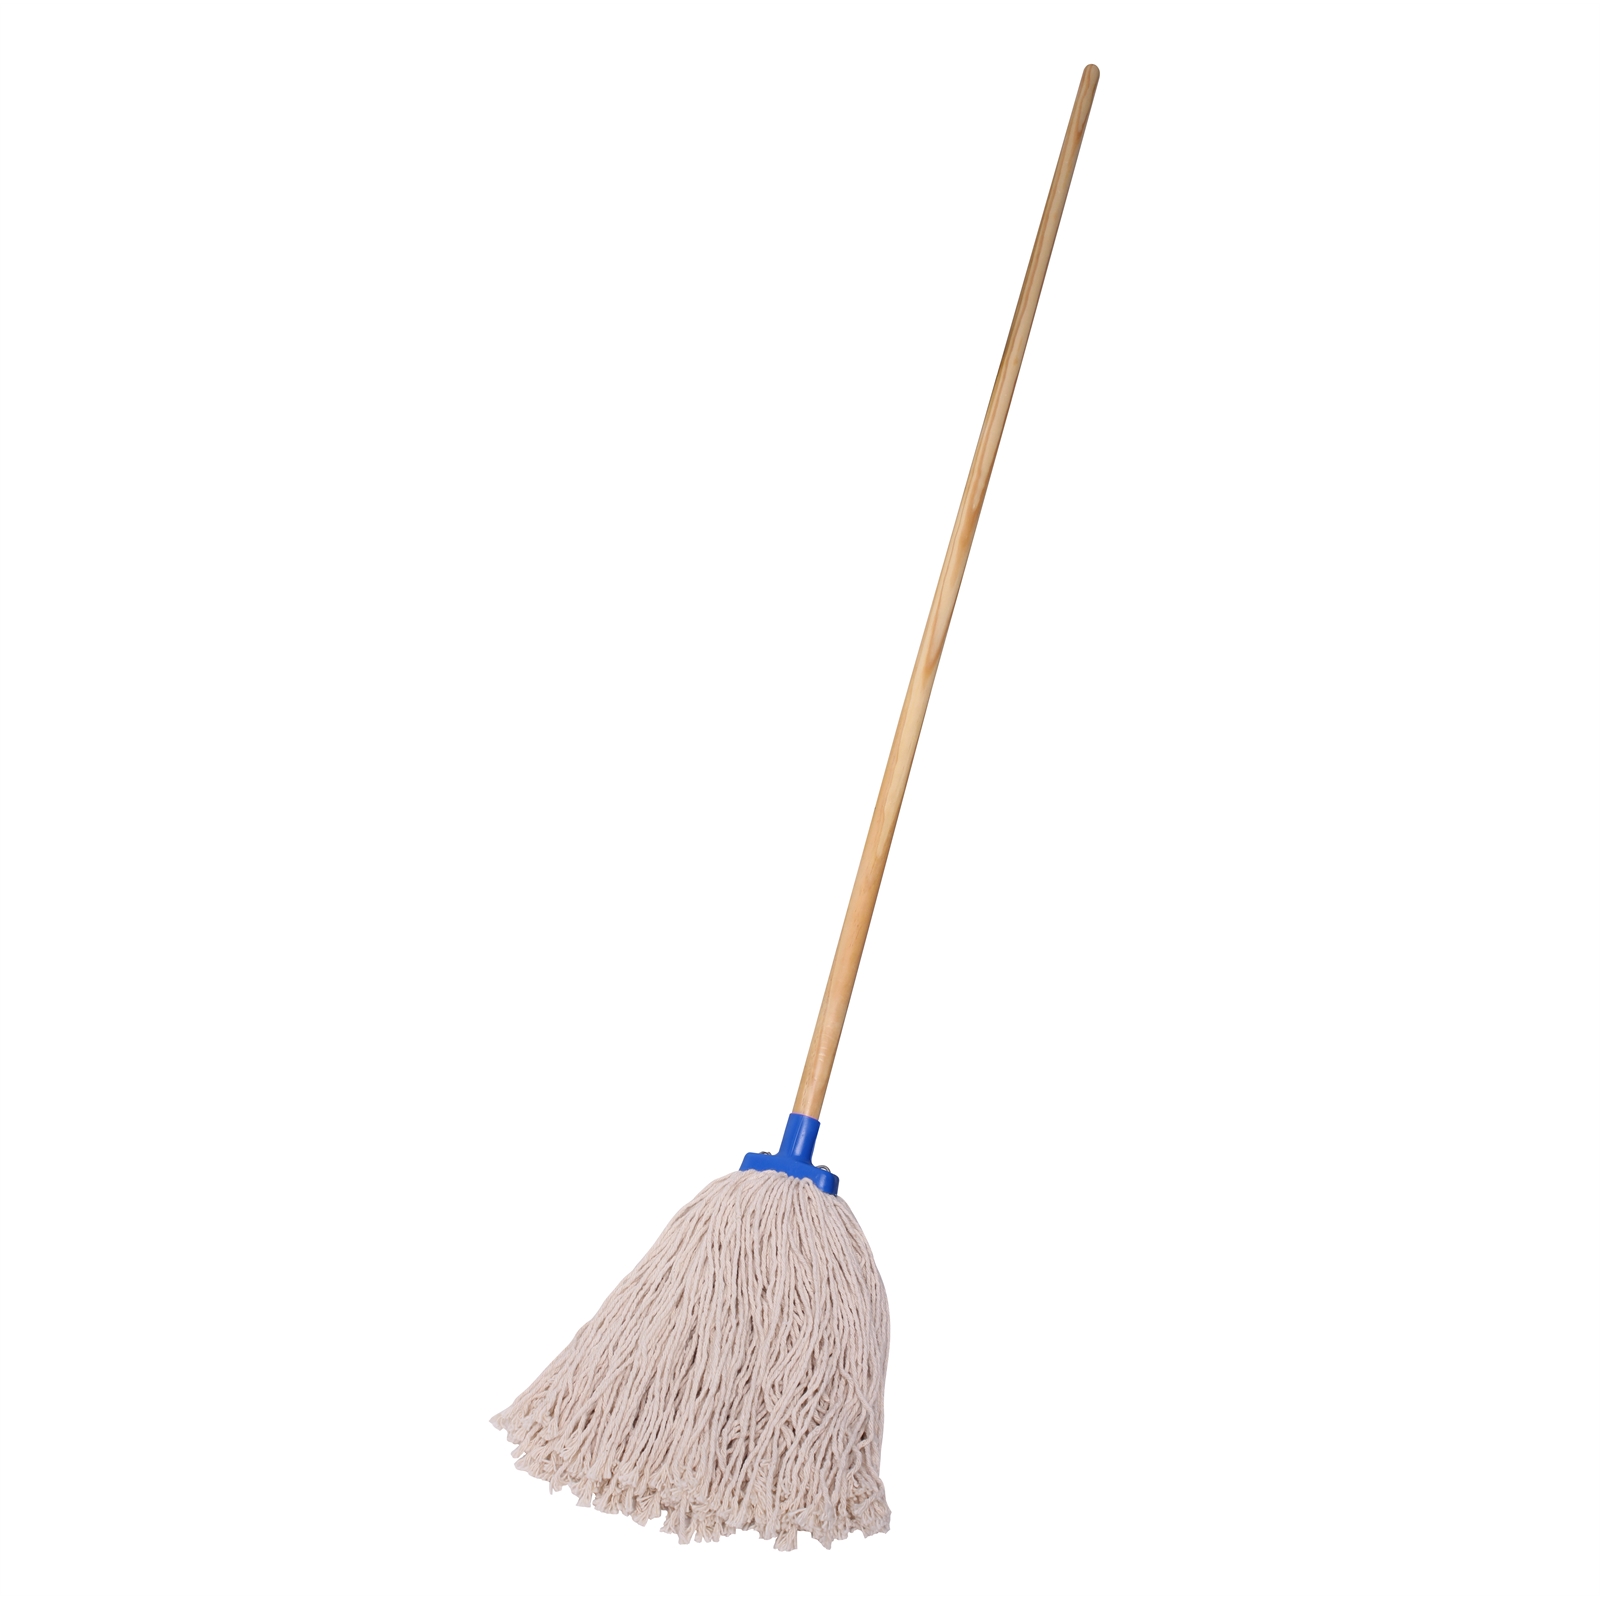 Sabco 600g Cotton Contractor Mop With Wooden Handle